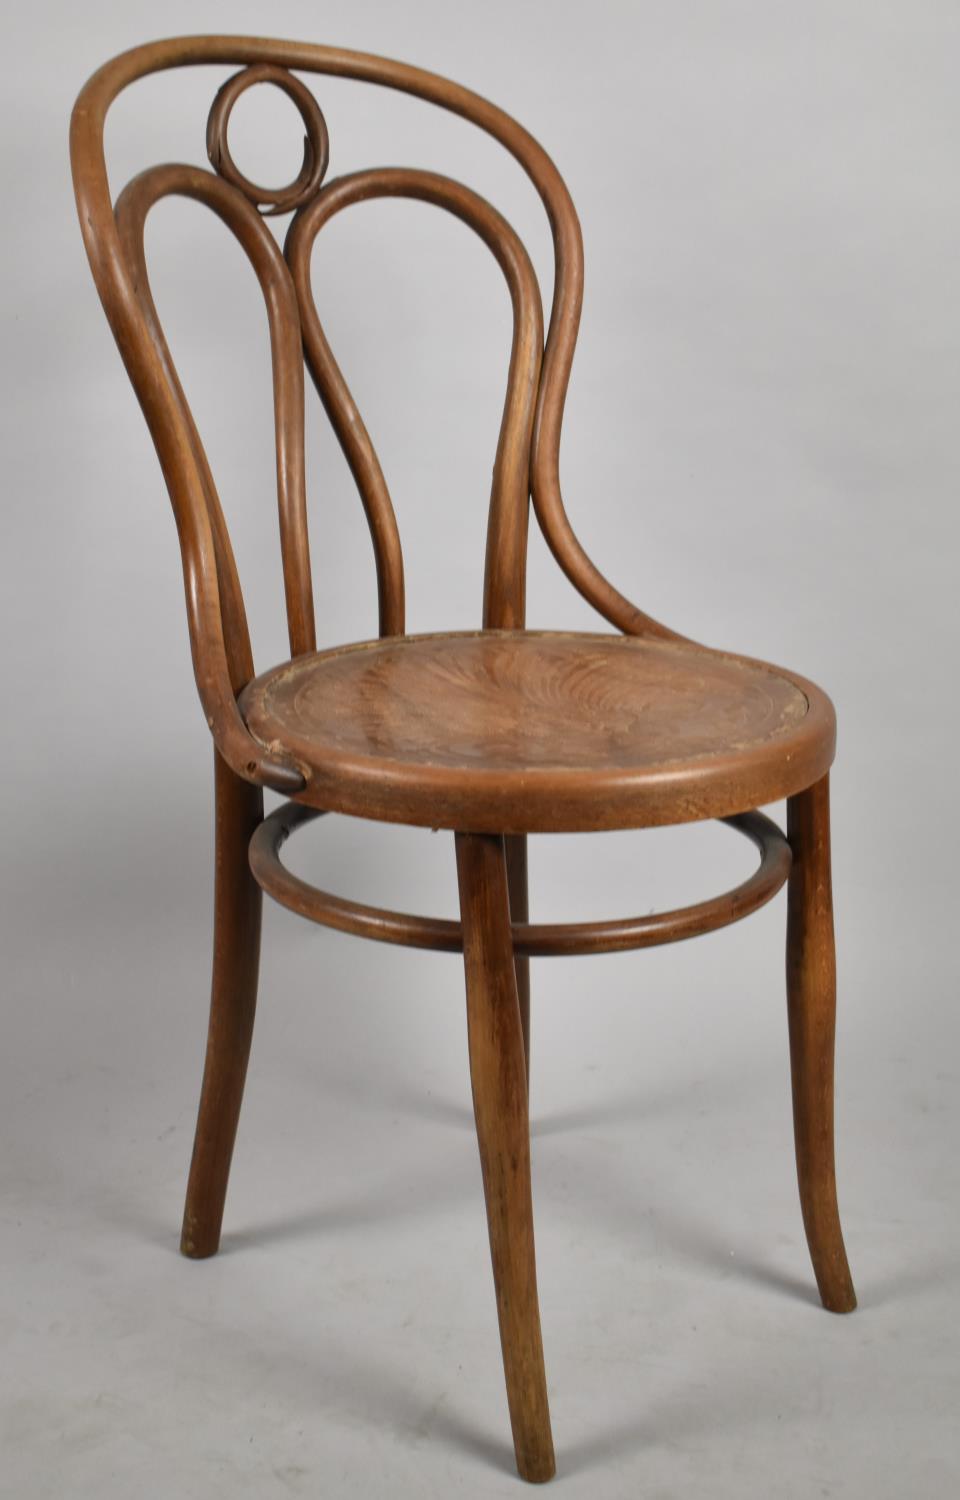 A Vintage Bentwood Side Chair, Some Condition Issues